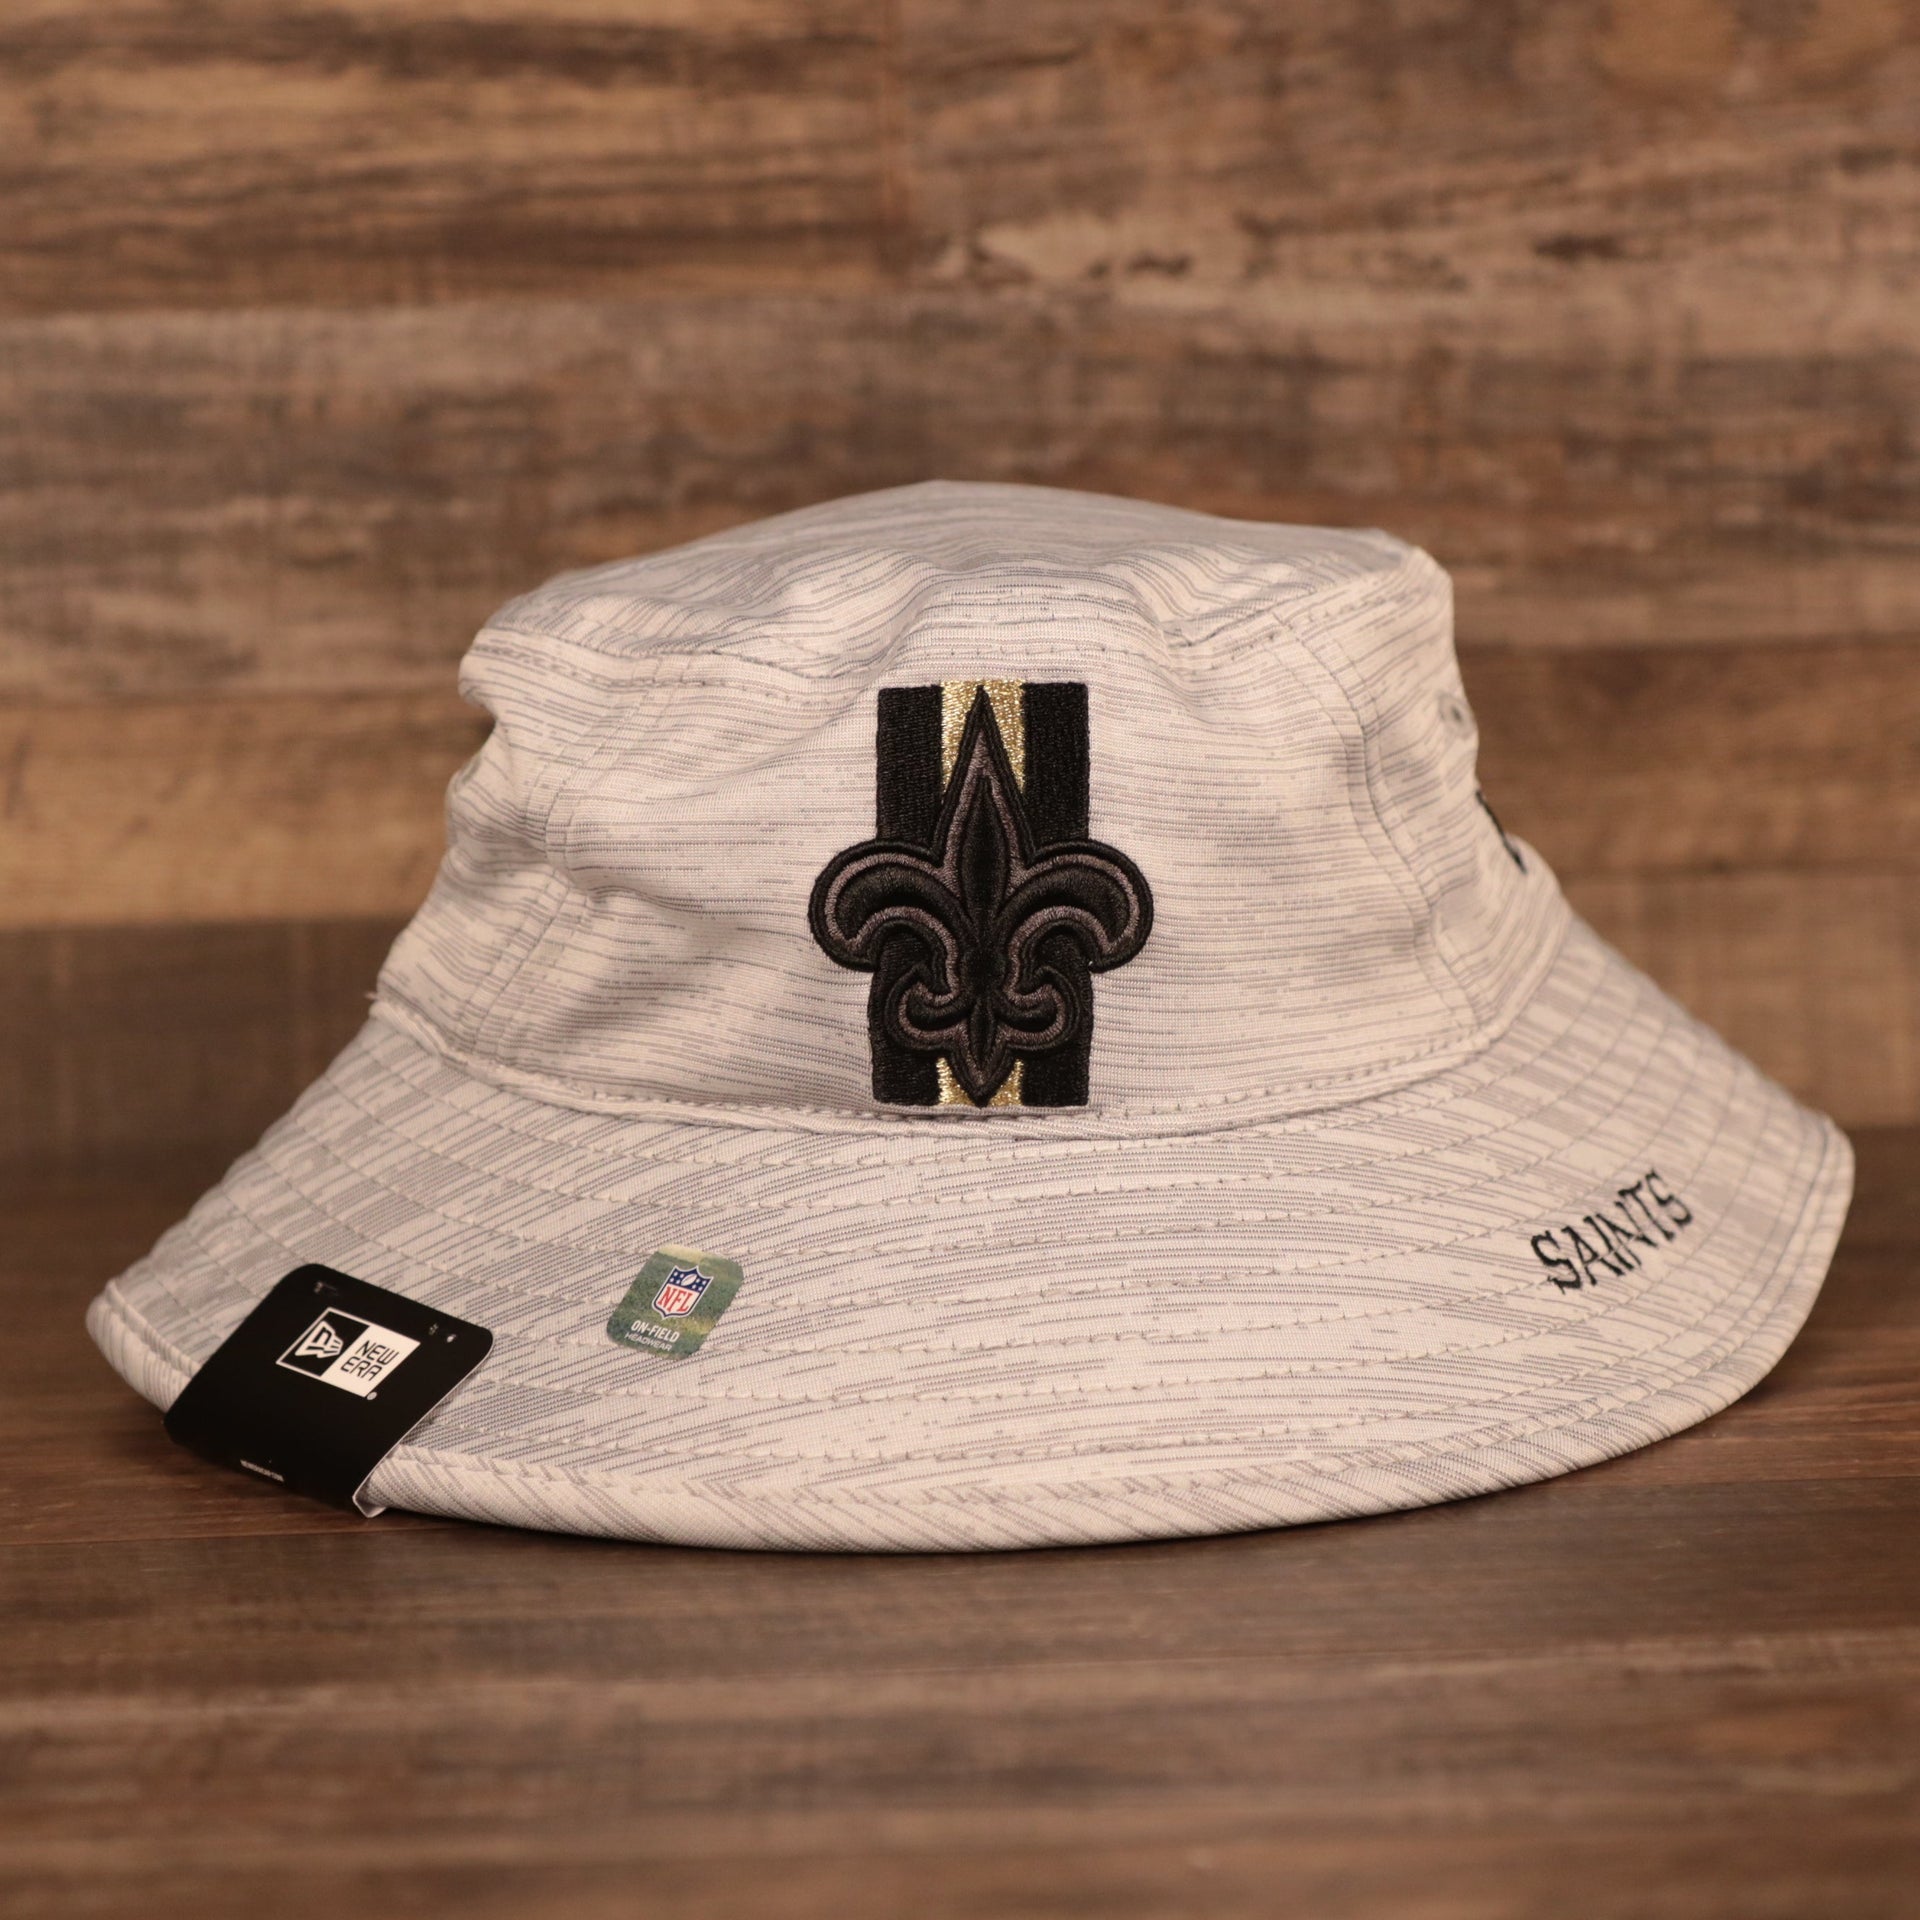 The Saints patch on the front side of the nfl training hats gray bucket hat.